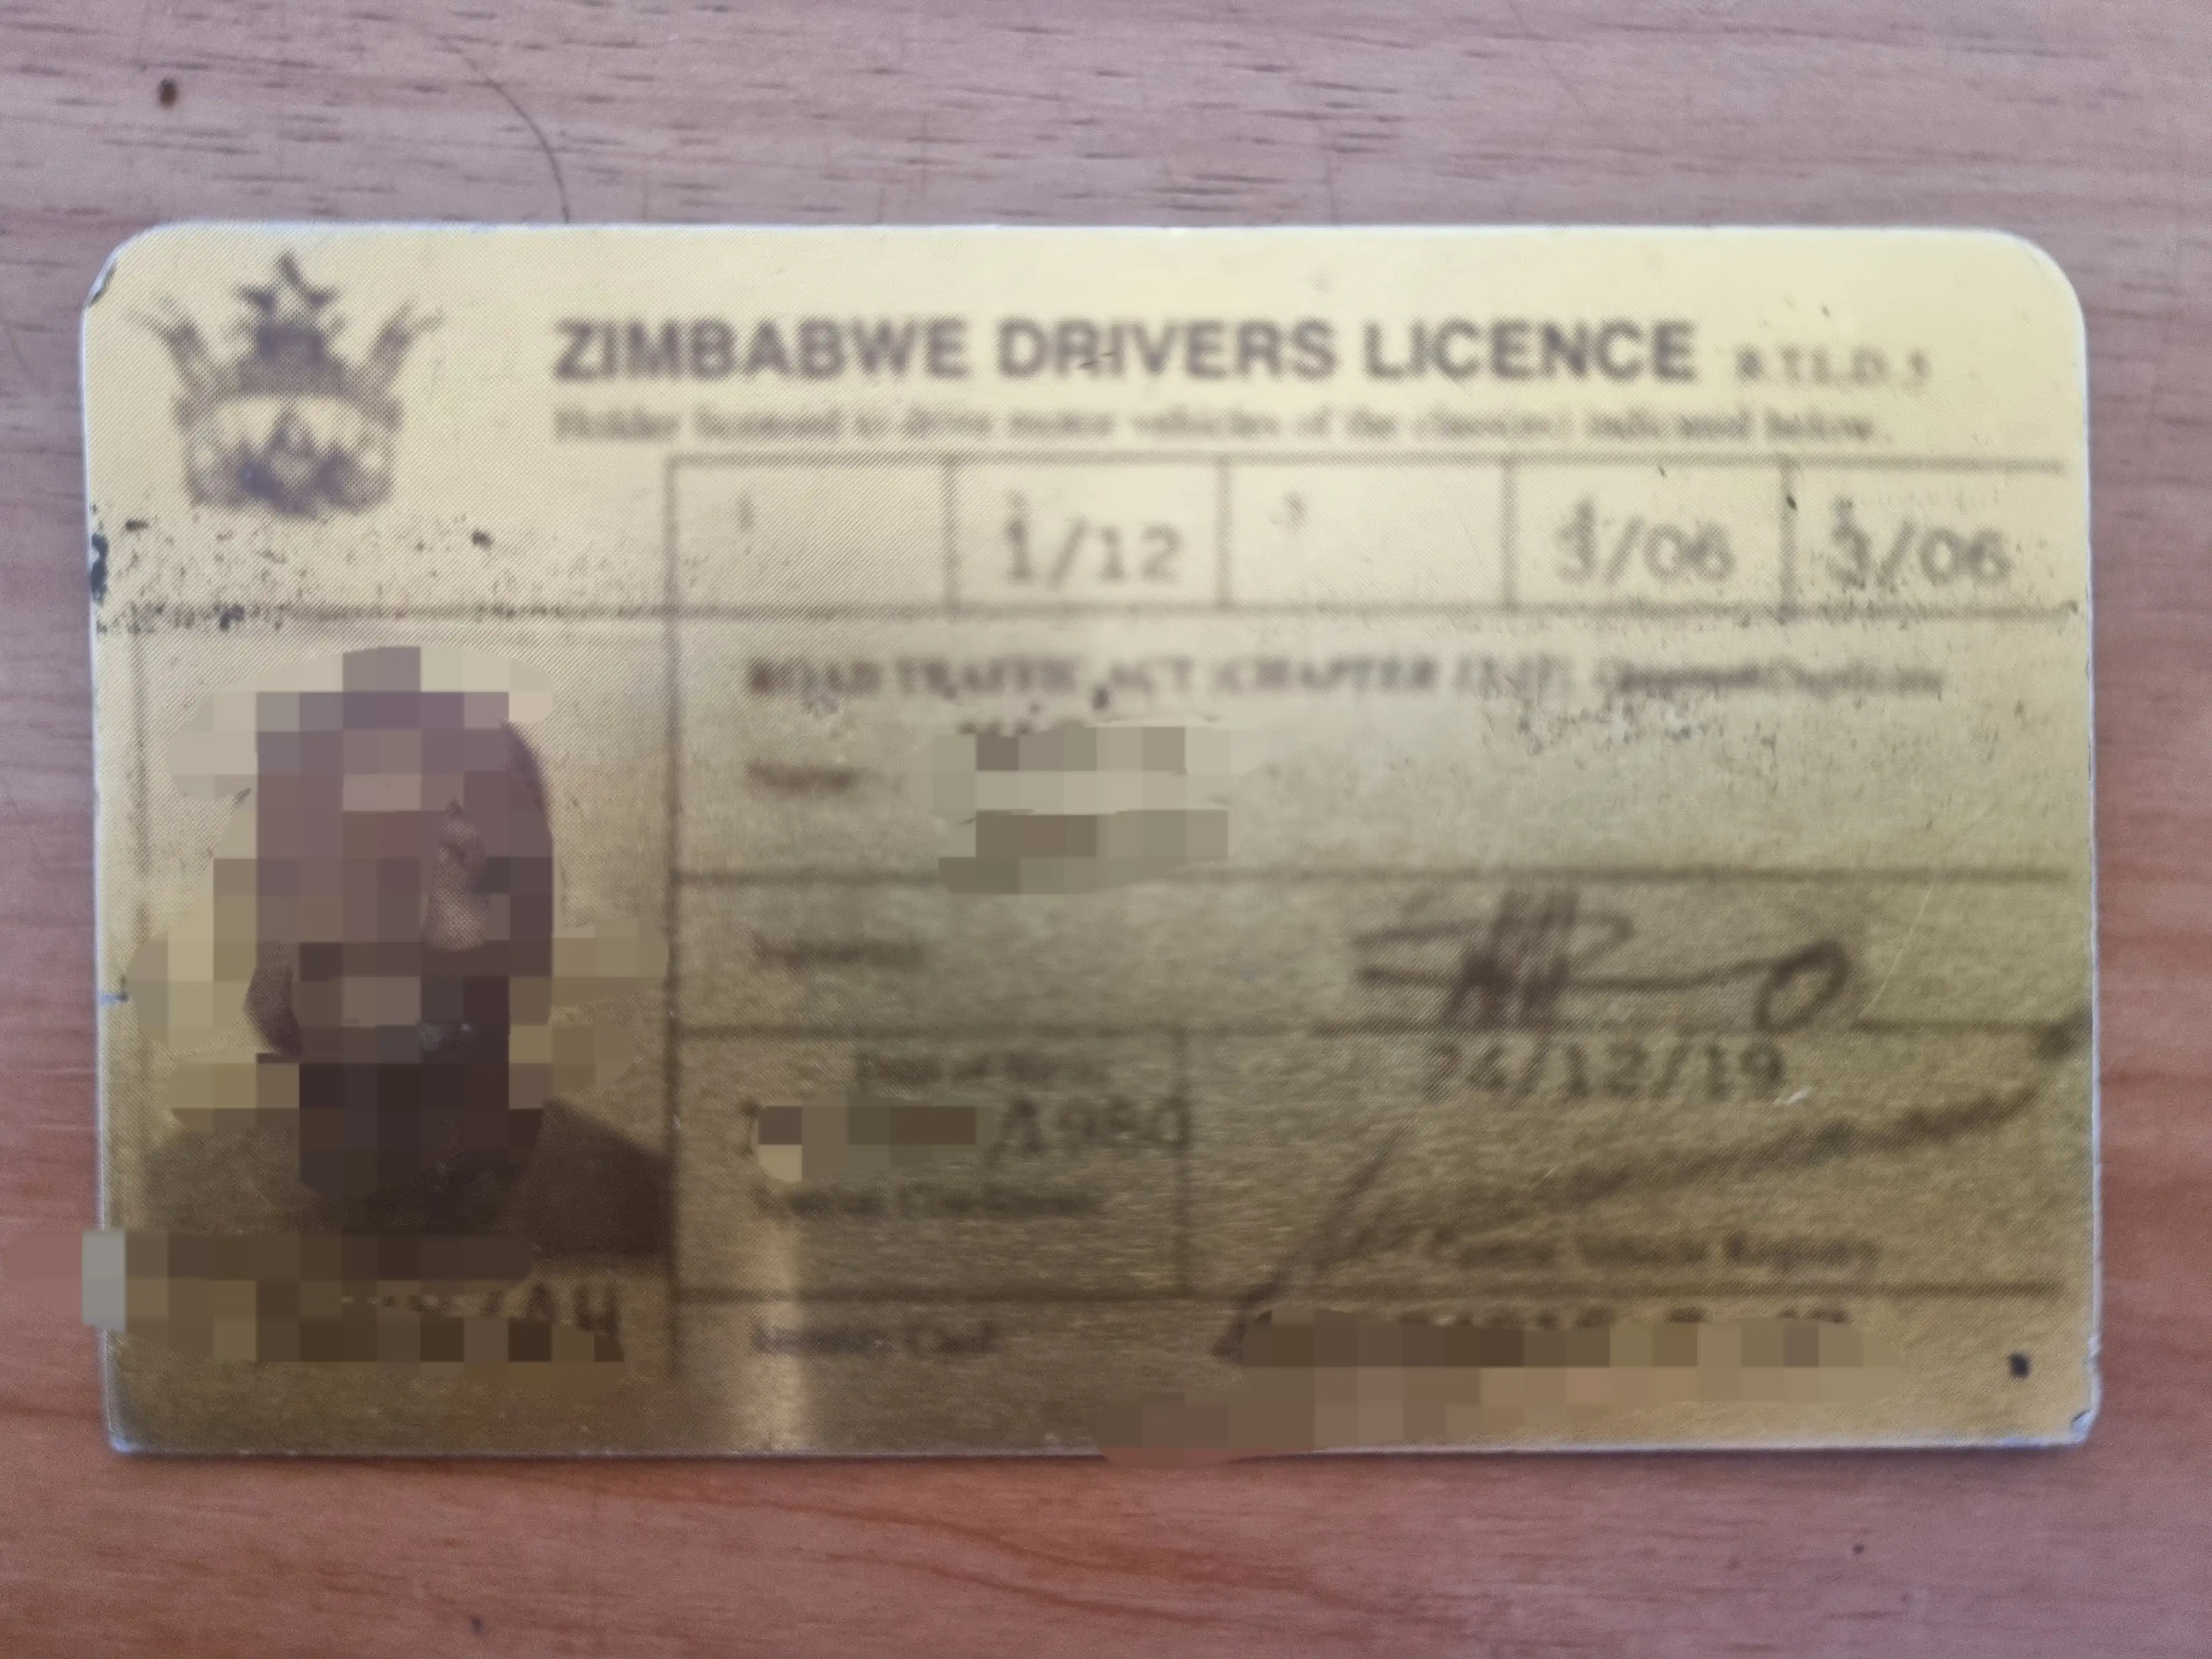 Zimbabwean Drivers Trigger Alarming Rise in UK Road Accidents - Fake Licences, Inexperience Cited